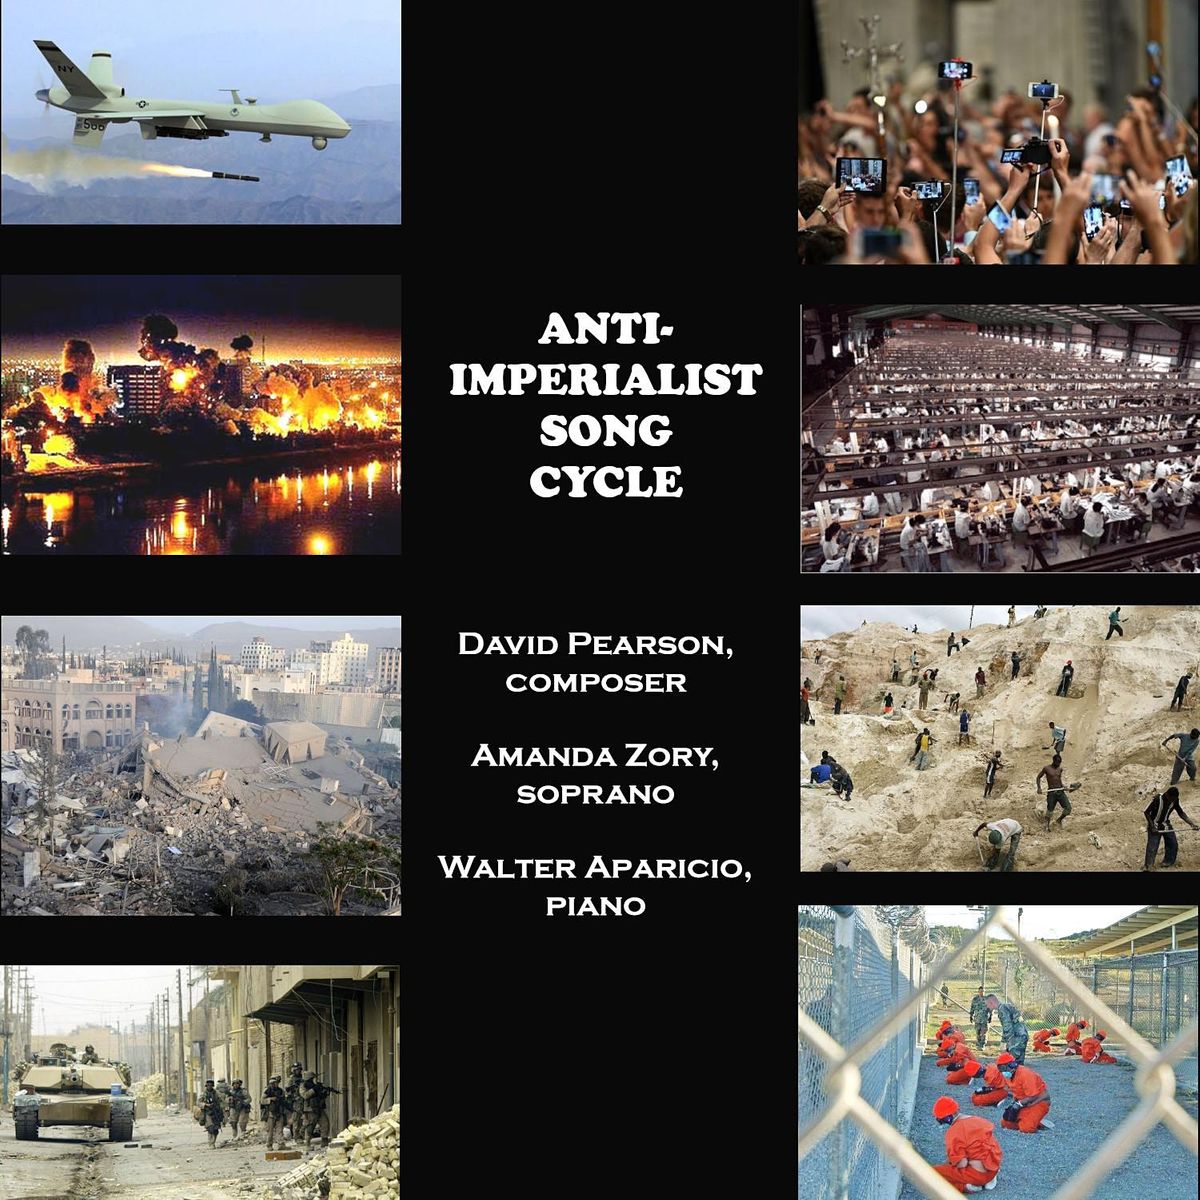 The Anti-Imperialist Song Cycle